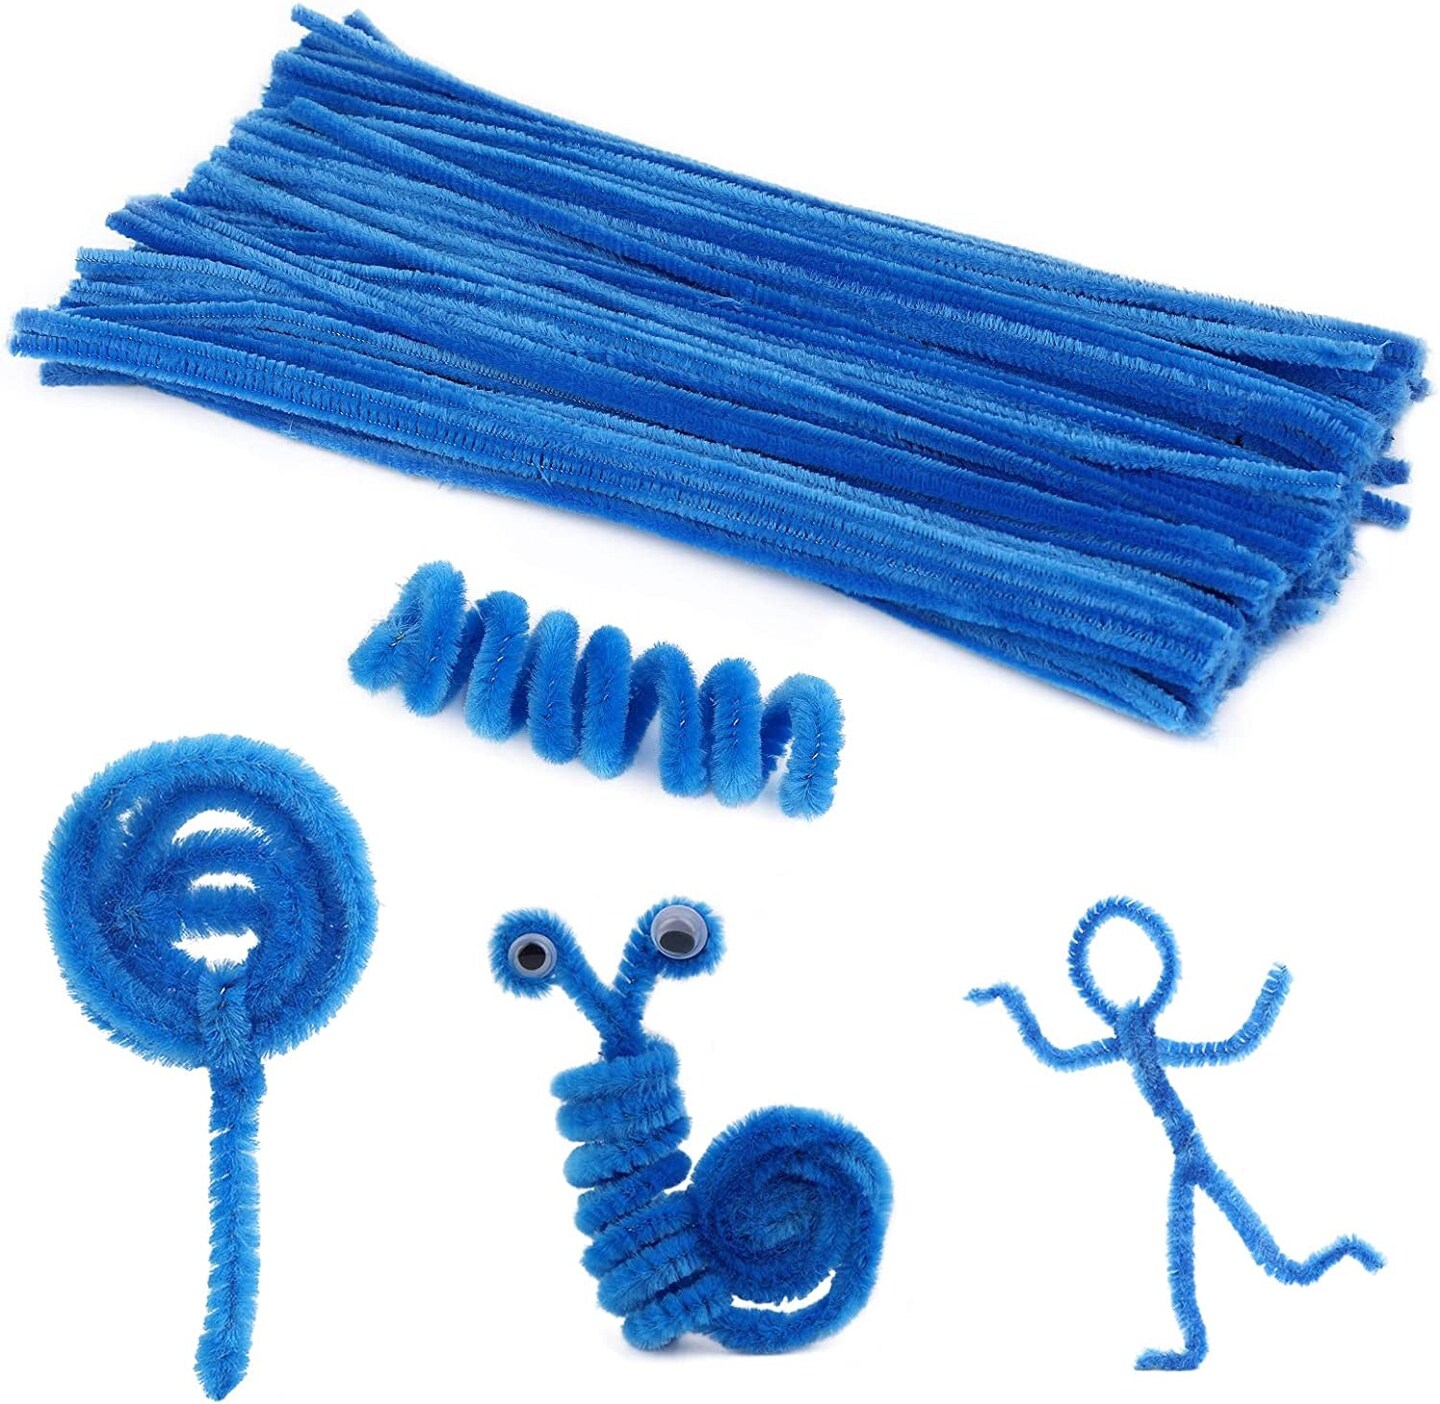 Pipe Cleaners: Green 